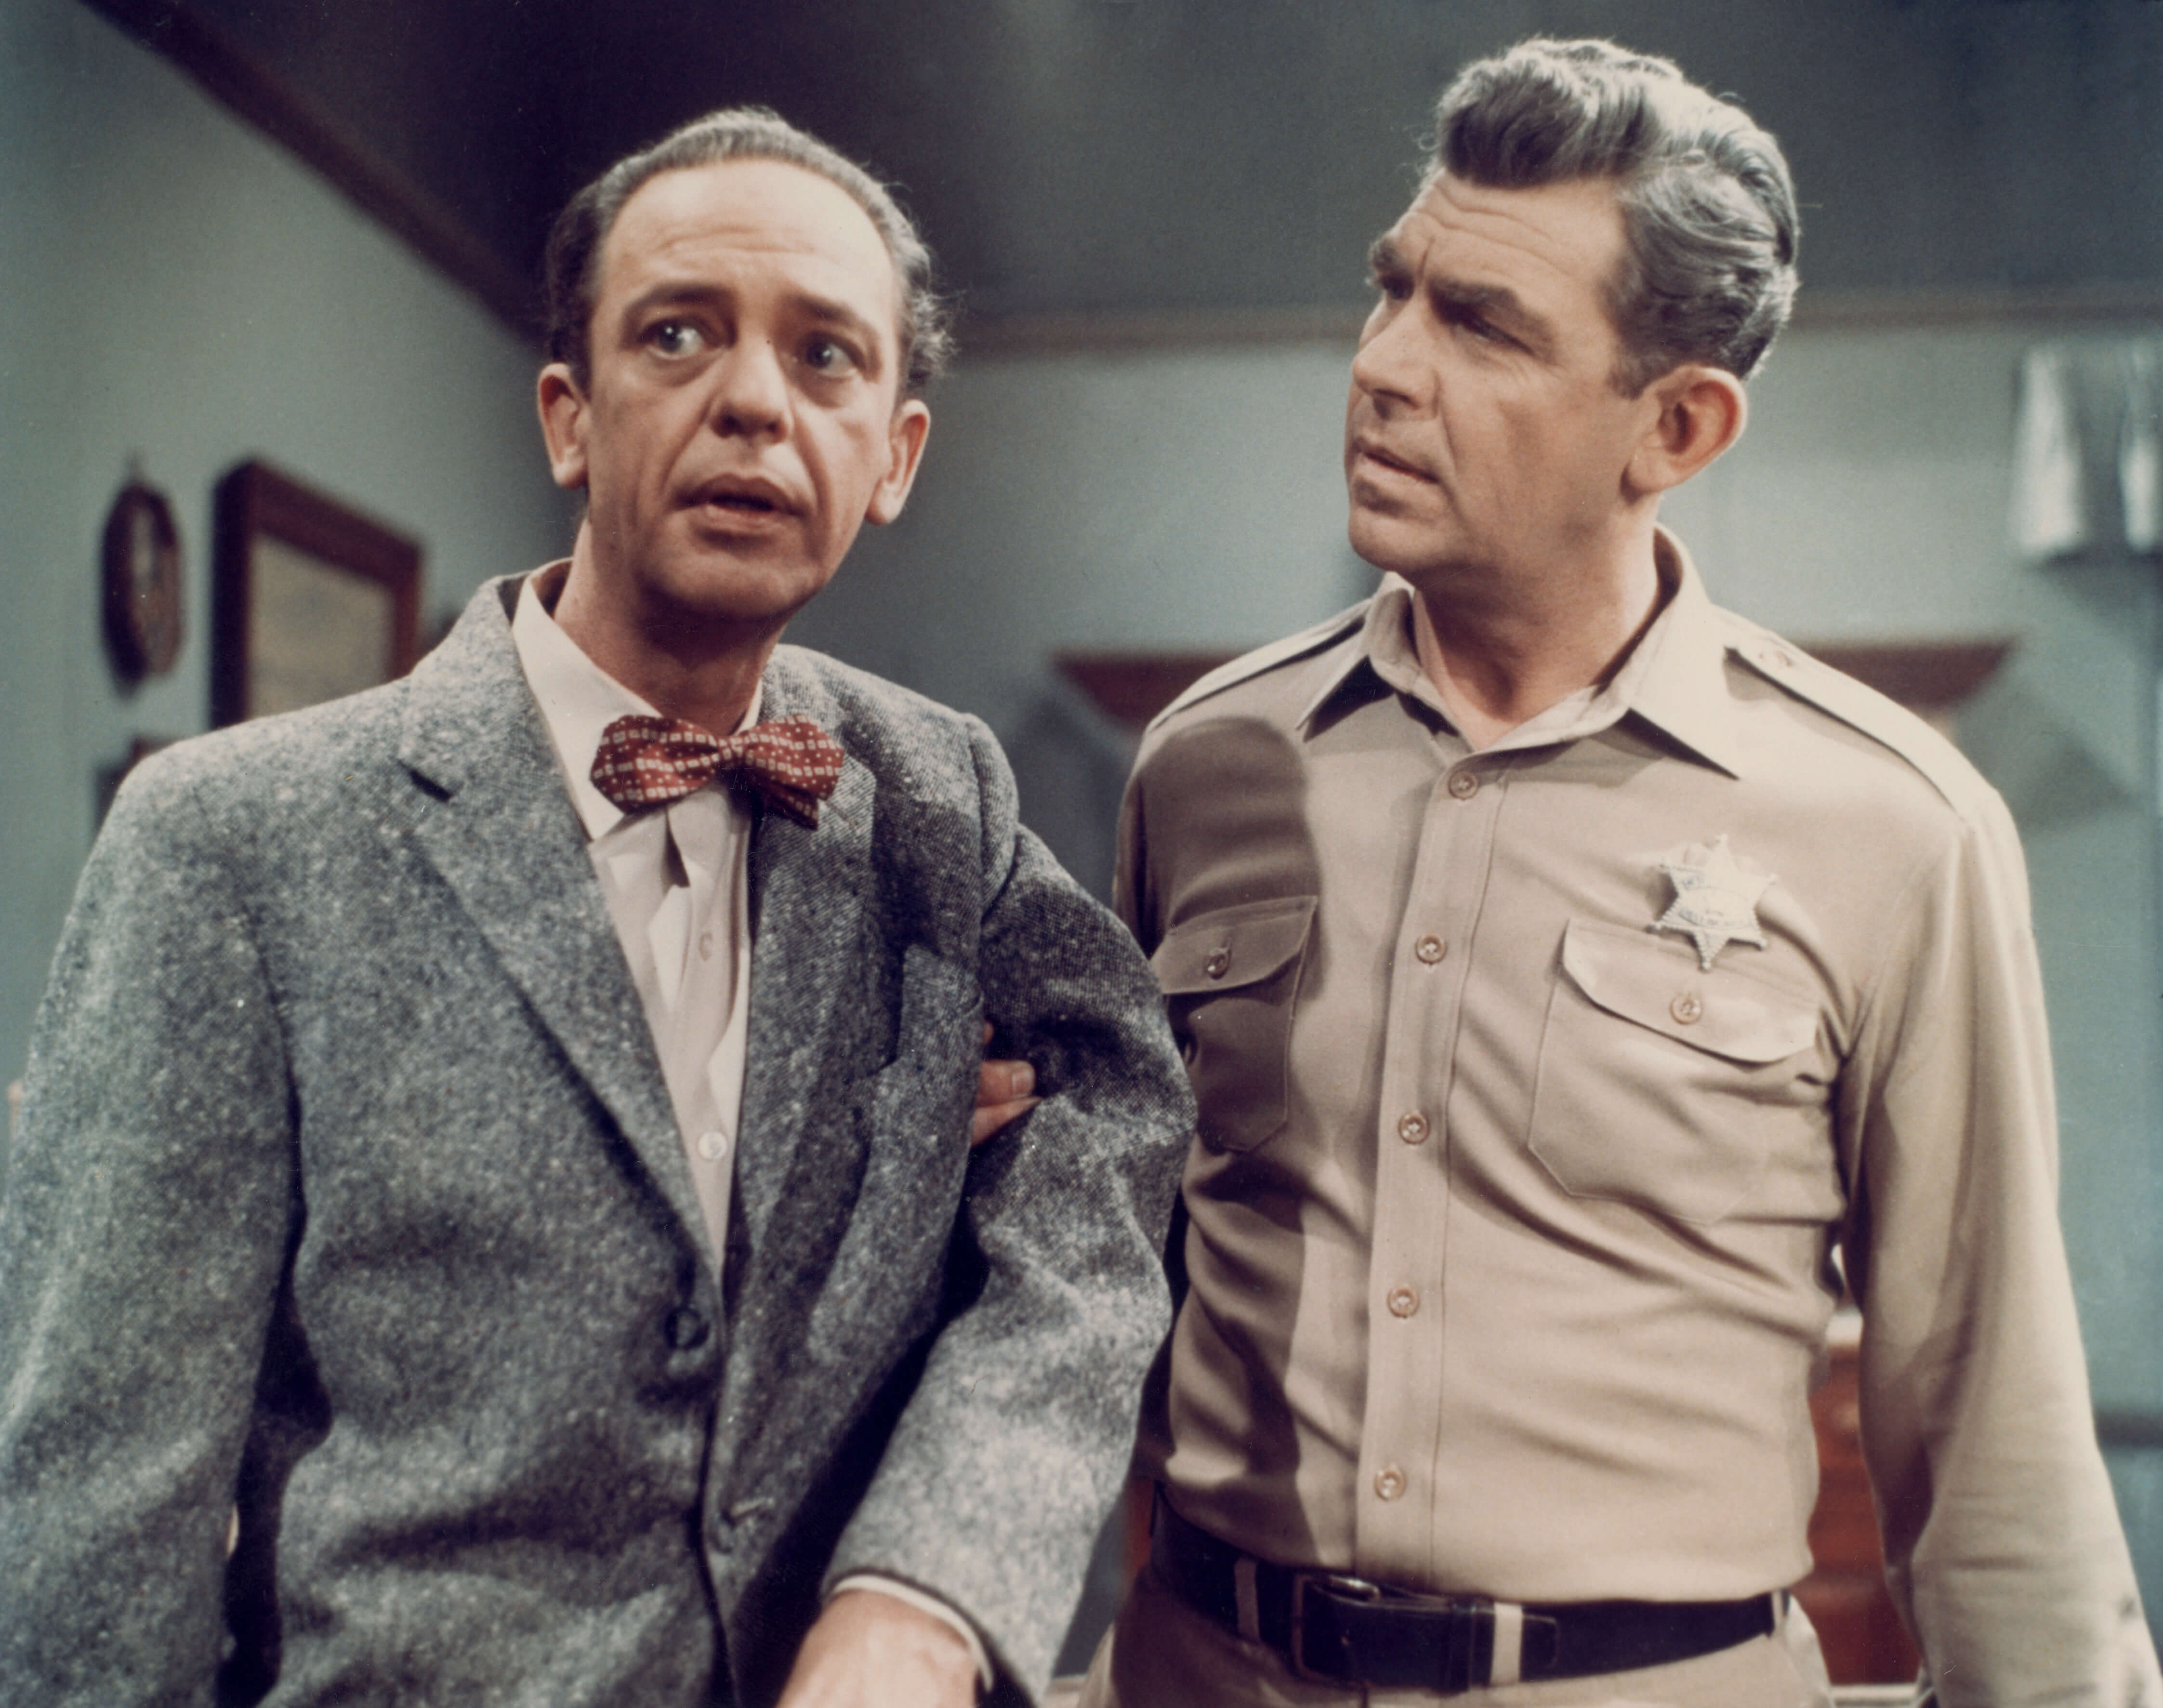 Andy Griffith and Don Knotts, who were friends for life, stand next to each other.